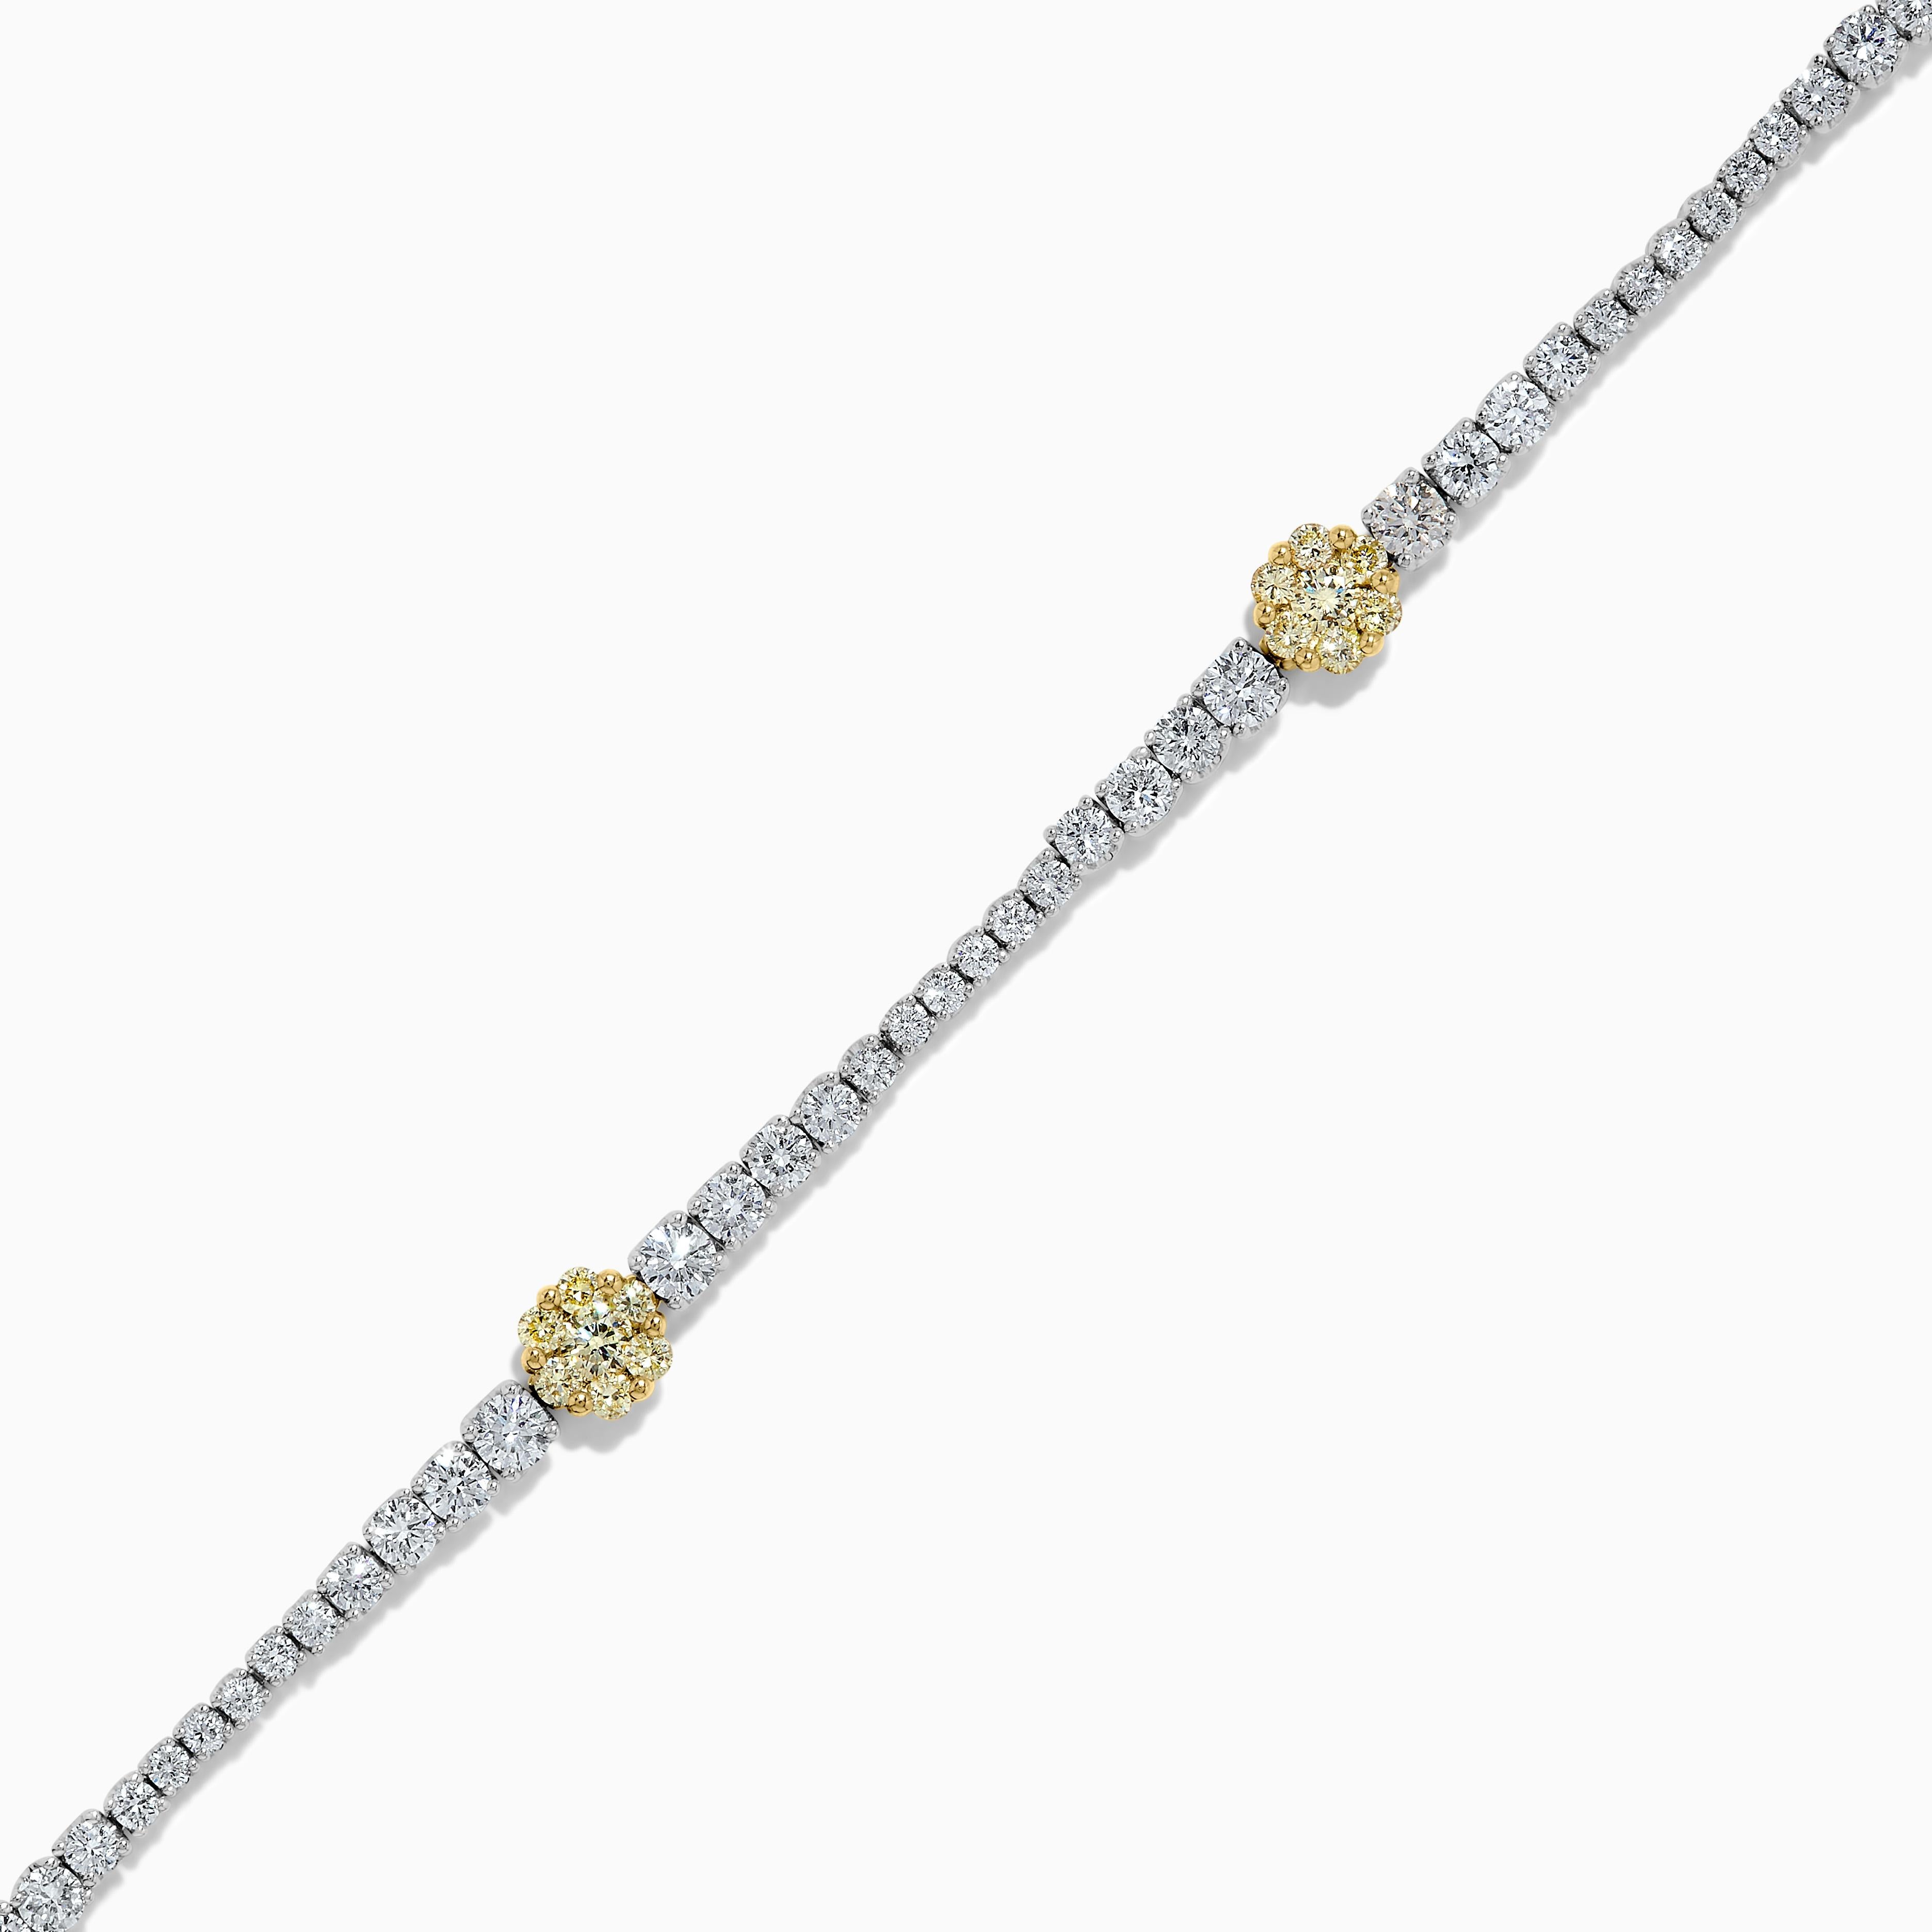 RareGemWorld's classic natural round cut yellow diamond bracelet. Mounted in a beautiful 18K Yellow and White Gold setting with clusters of natural round cut yellow diamonds. The yellow diamonds are surrounded by small round natural white diamond